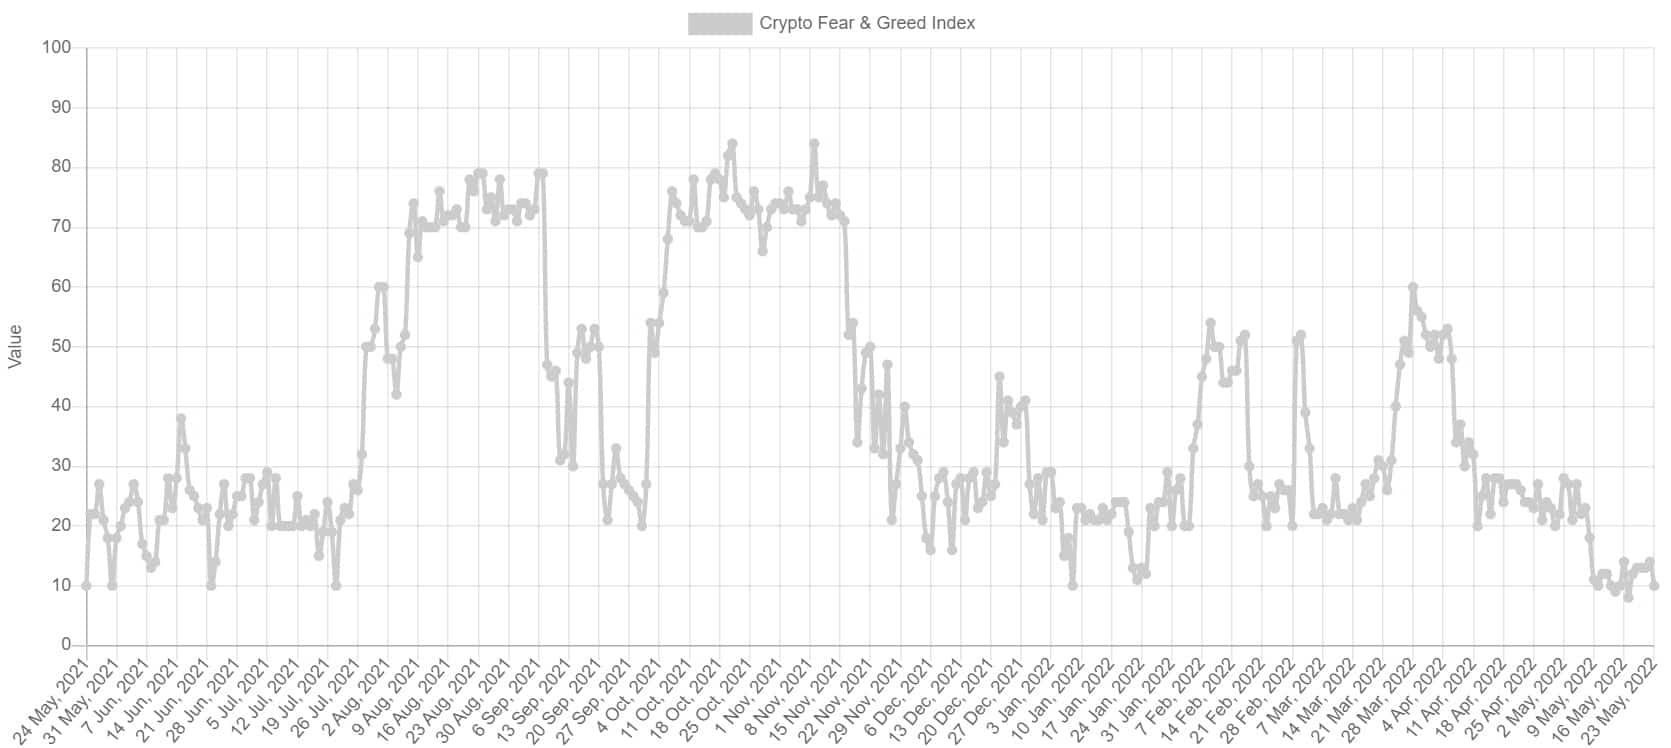 Bitcoin Fear and Greed Index. Source: Alternative.me